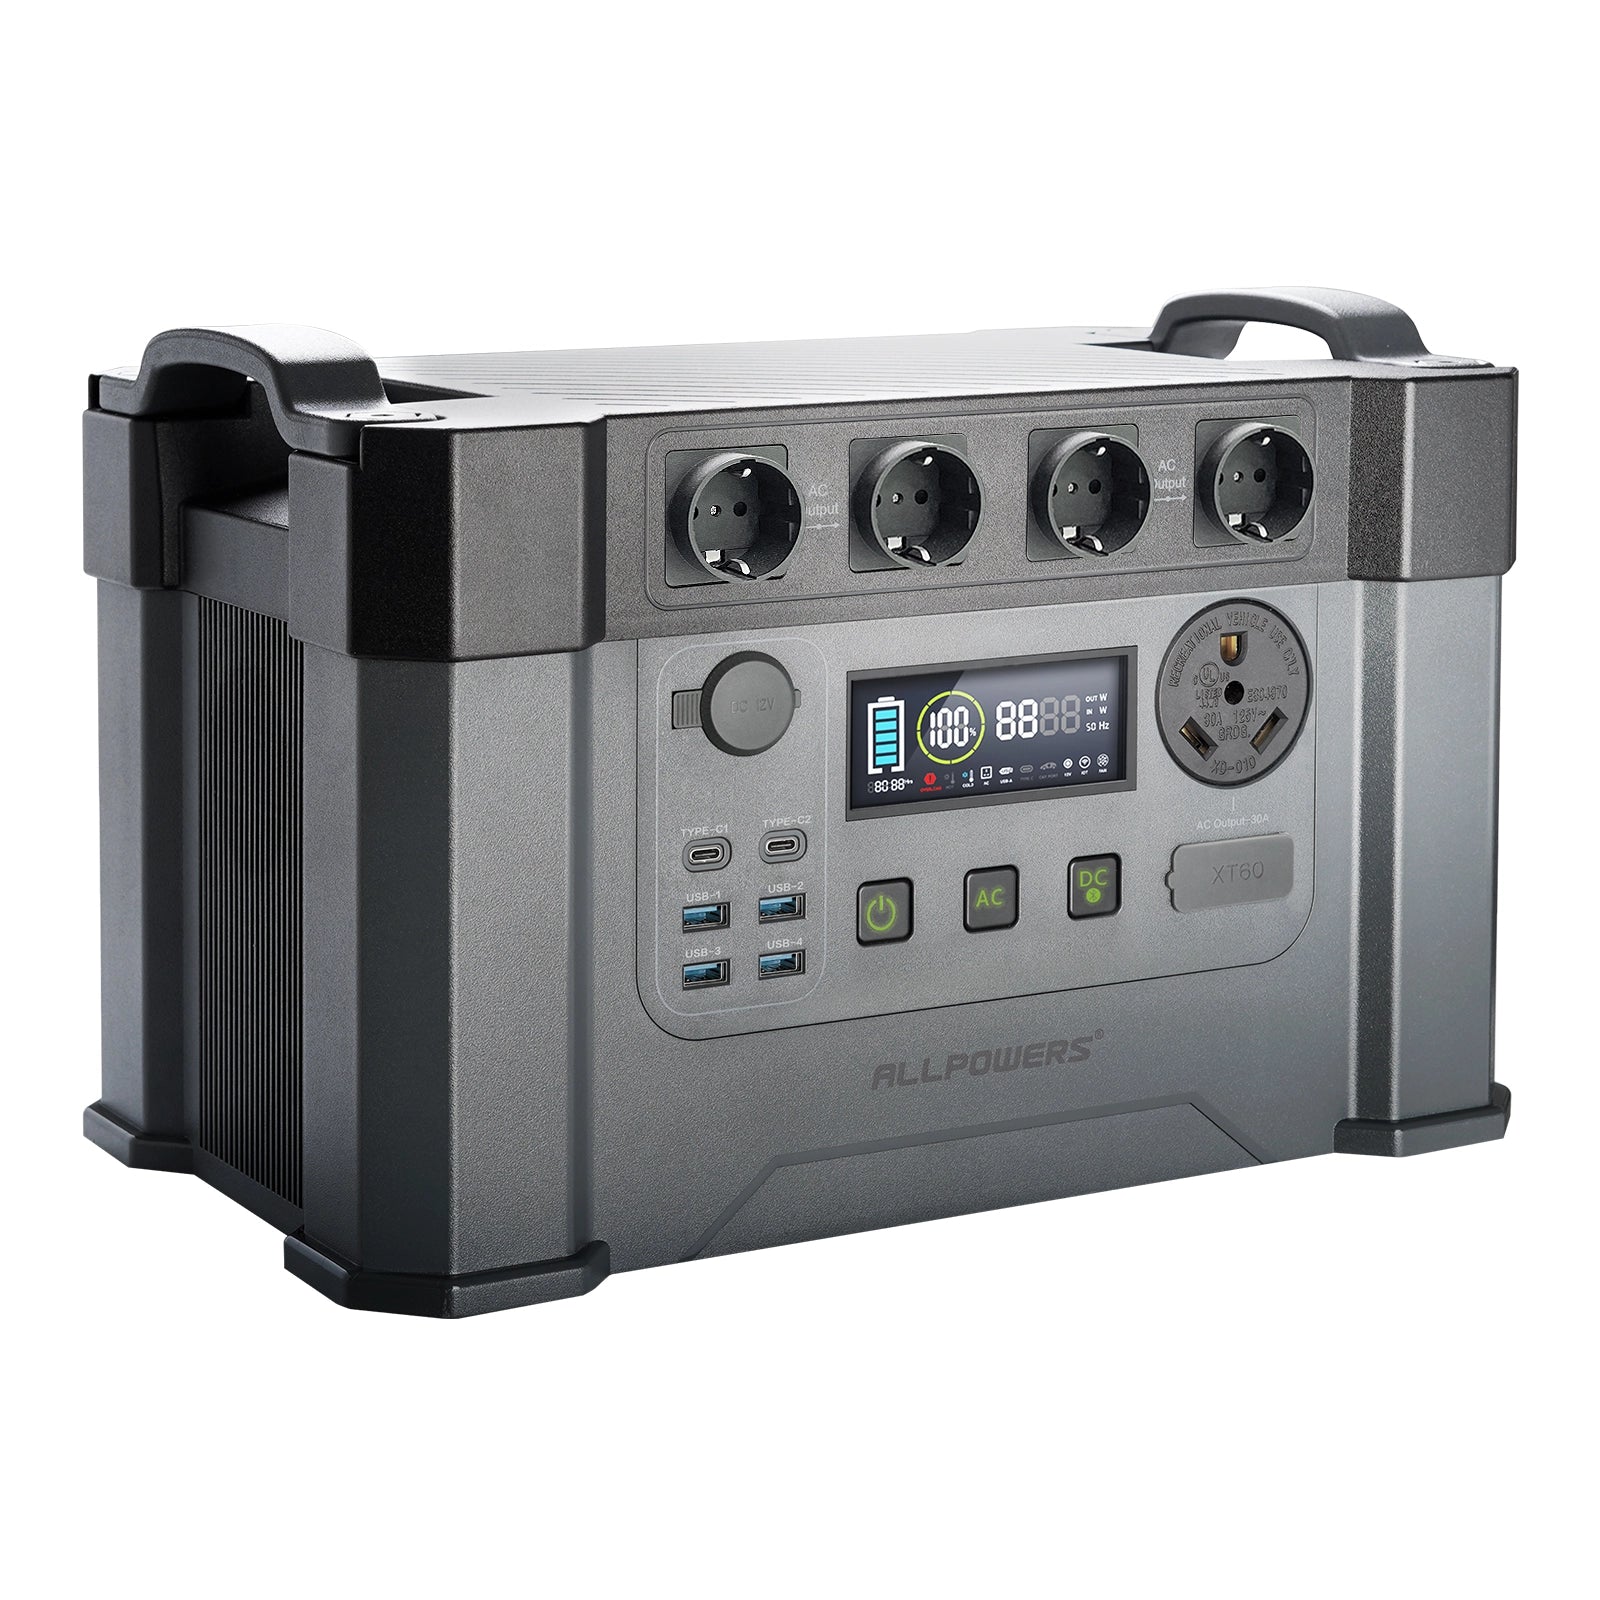 ALLPOWERS S2000 Pro Portable Power Station 2400W | 1500Wh